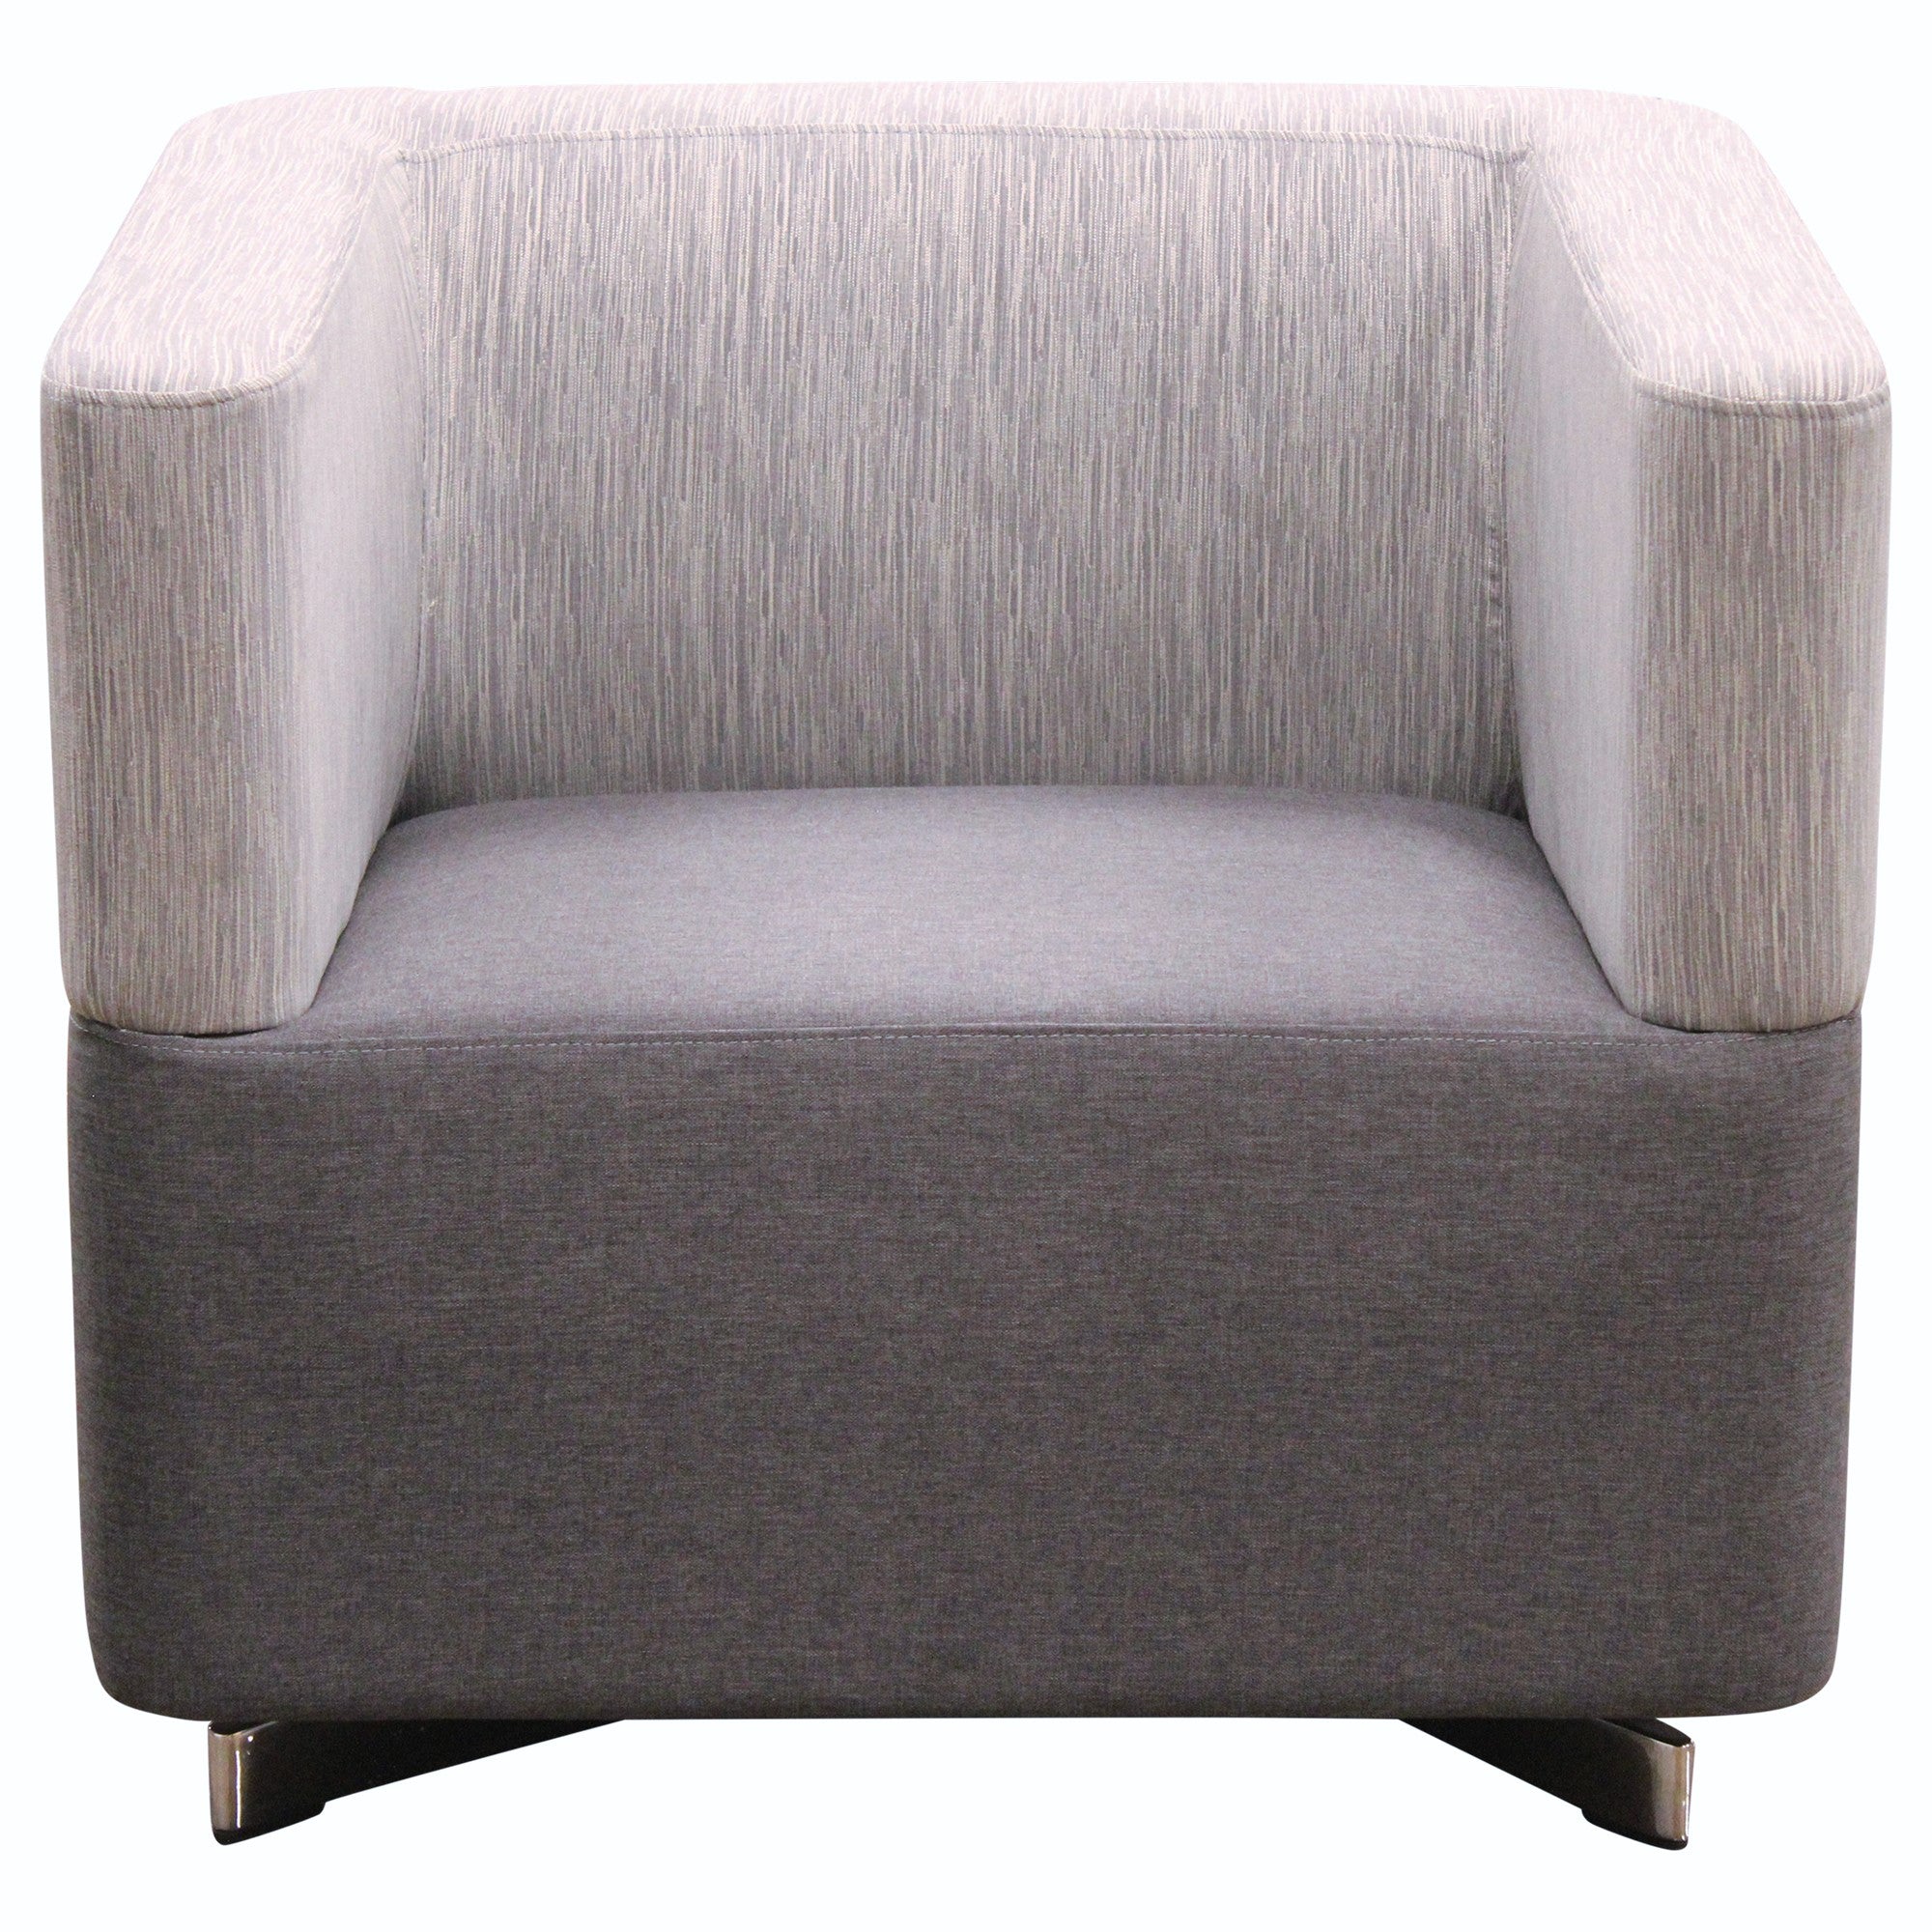 Davis Furniture Meo Lounge Chair, Light Grey - Preowned